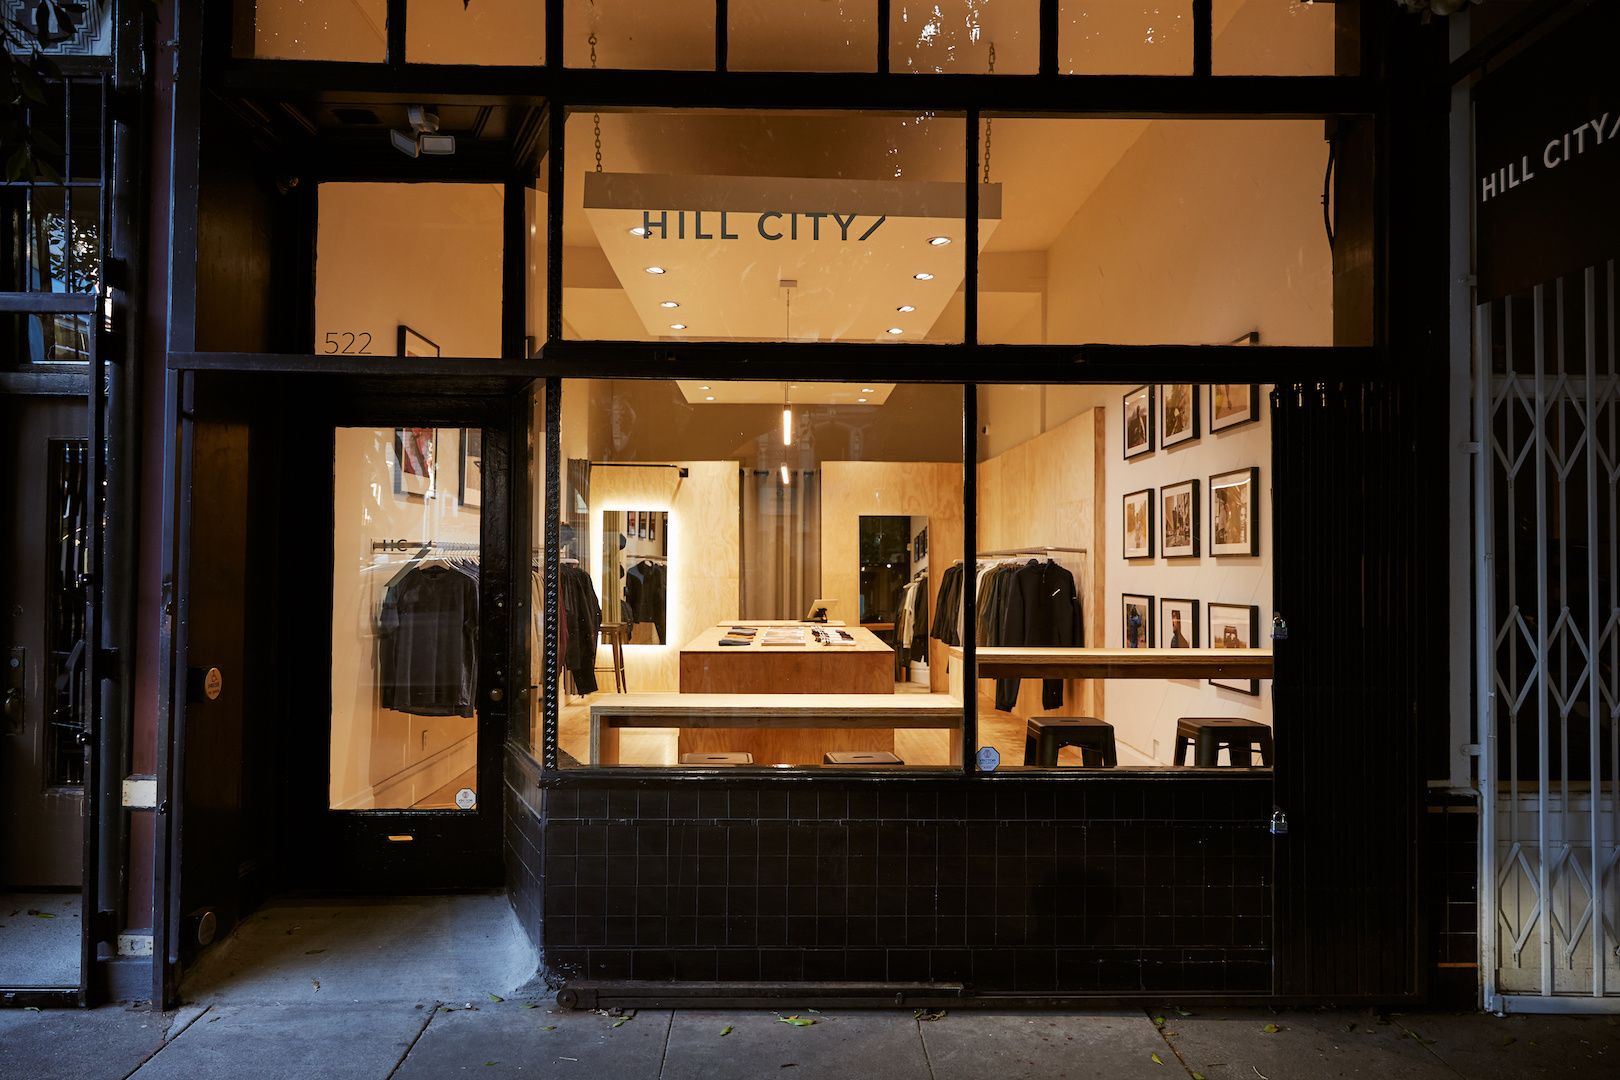 Bryr's stomping-good clog sale, Hill City's new Hayes Valley store +